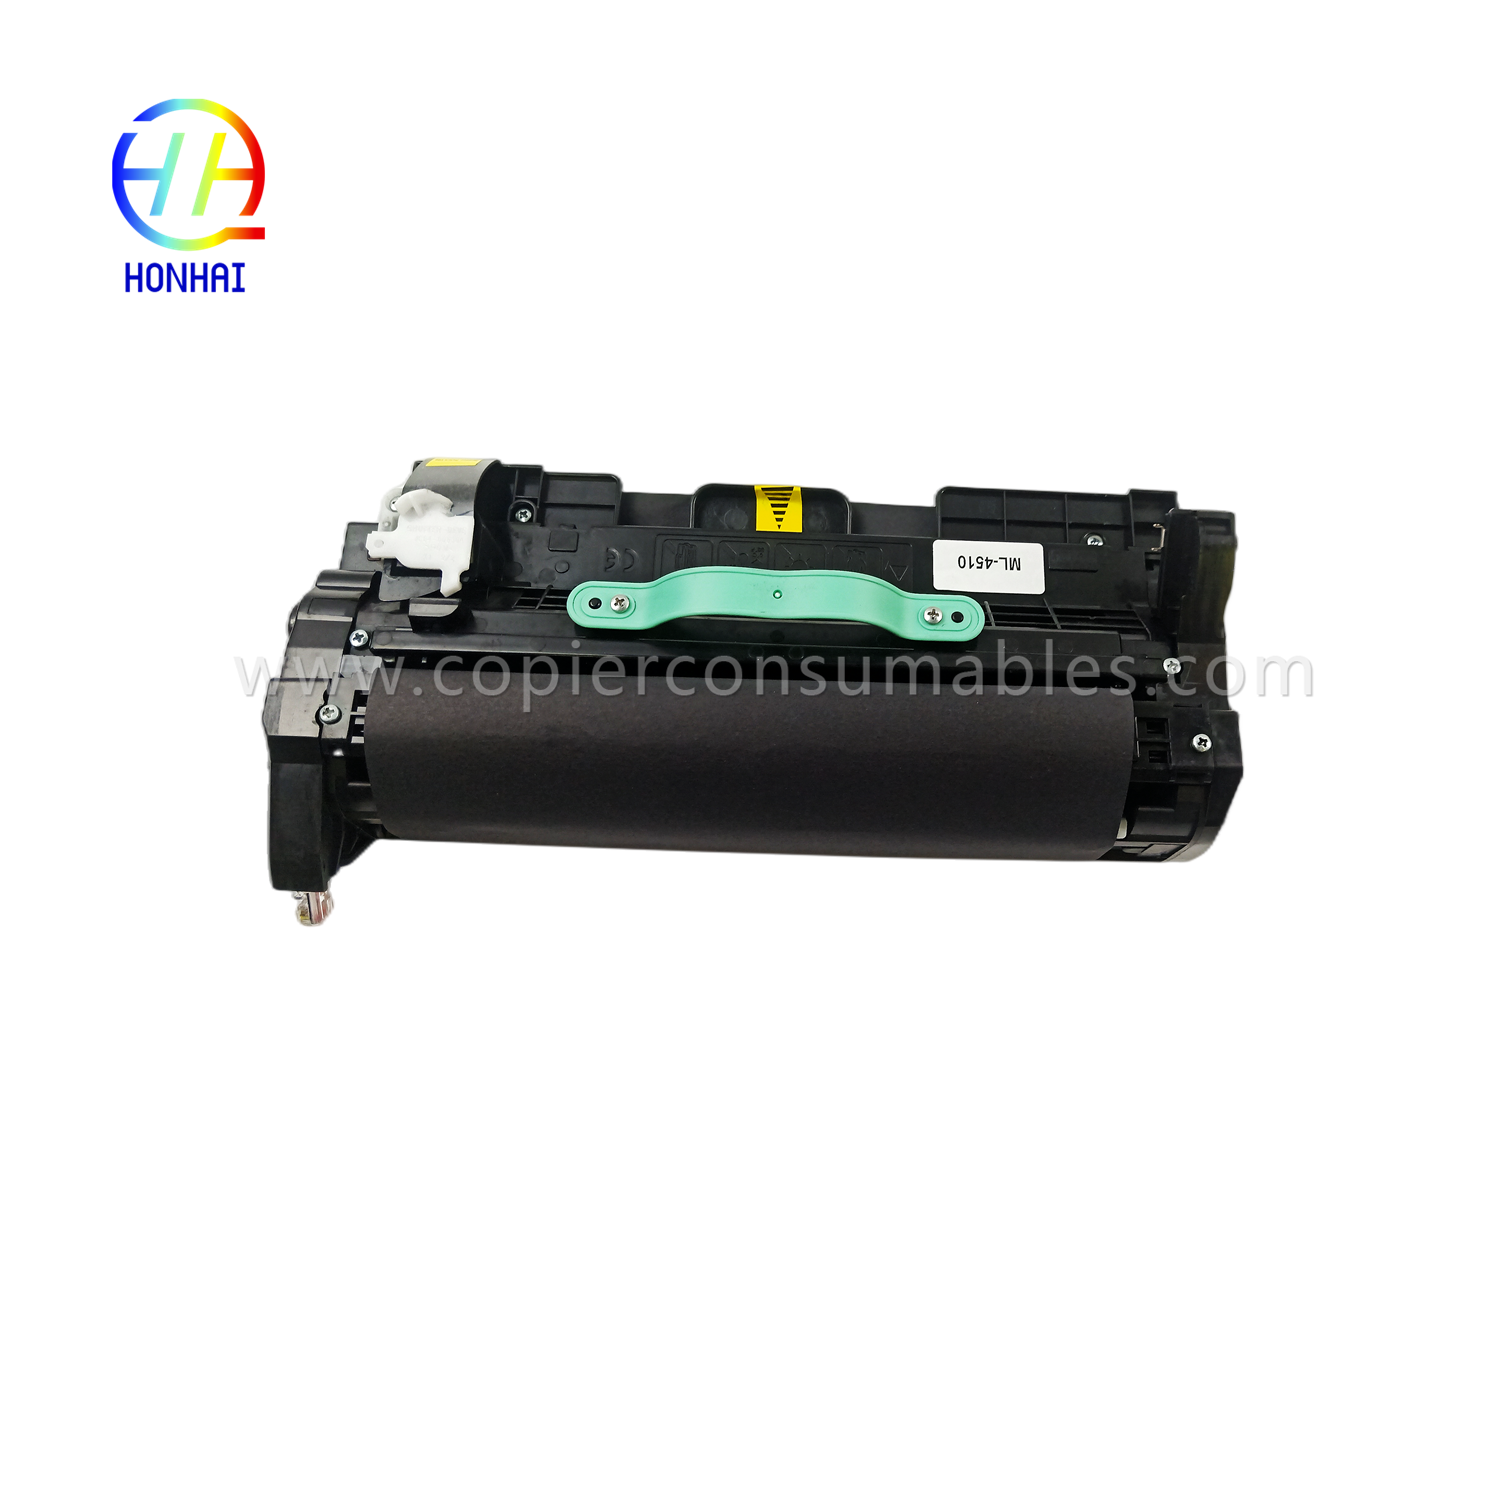 https://www.copierconsumables.com/fuser-unit-for-samsung-ml4510-ml4512-ml-4510nd-ml-4512nd-ml-4510-ml-4512-jc91-01028a-fusing-product/2-assembly-